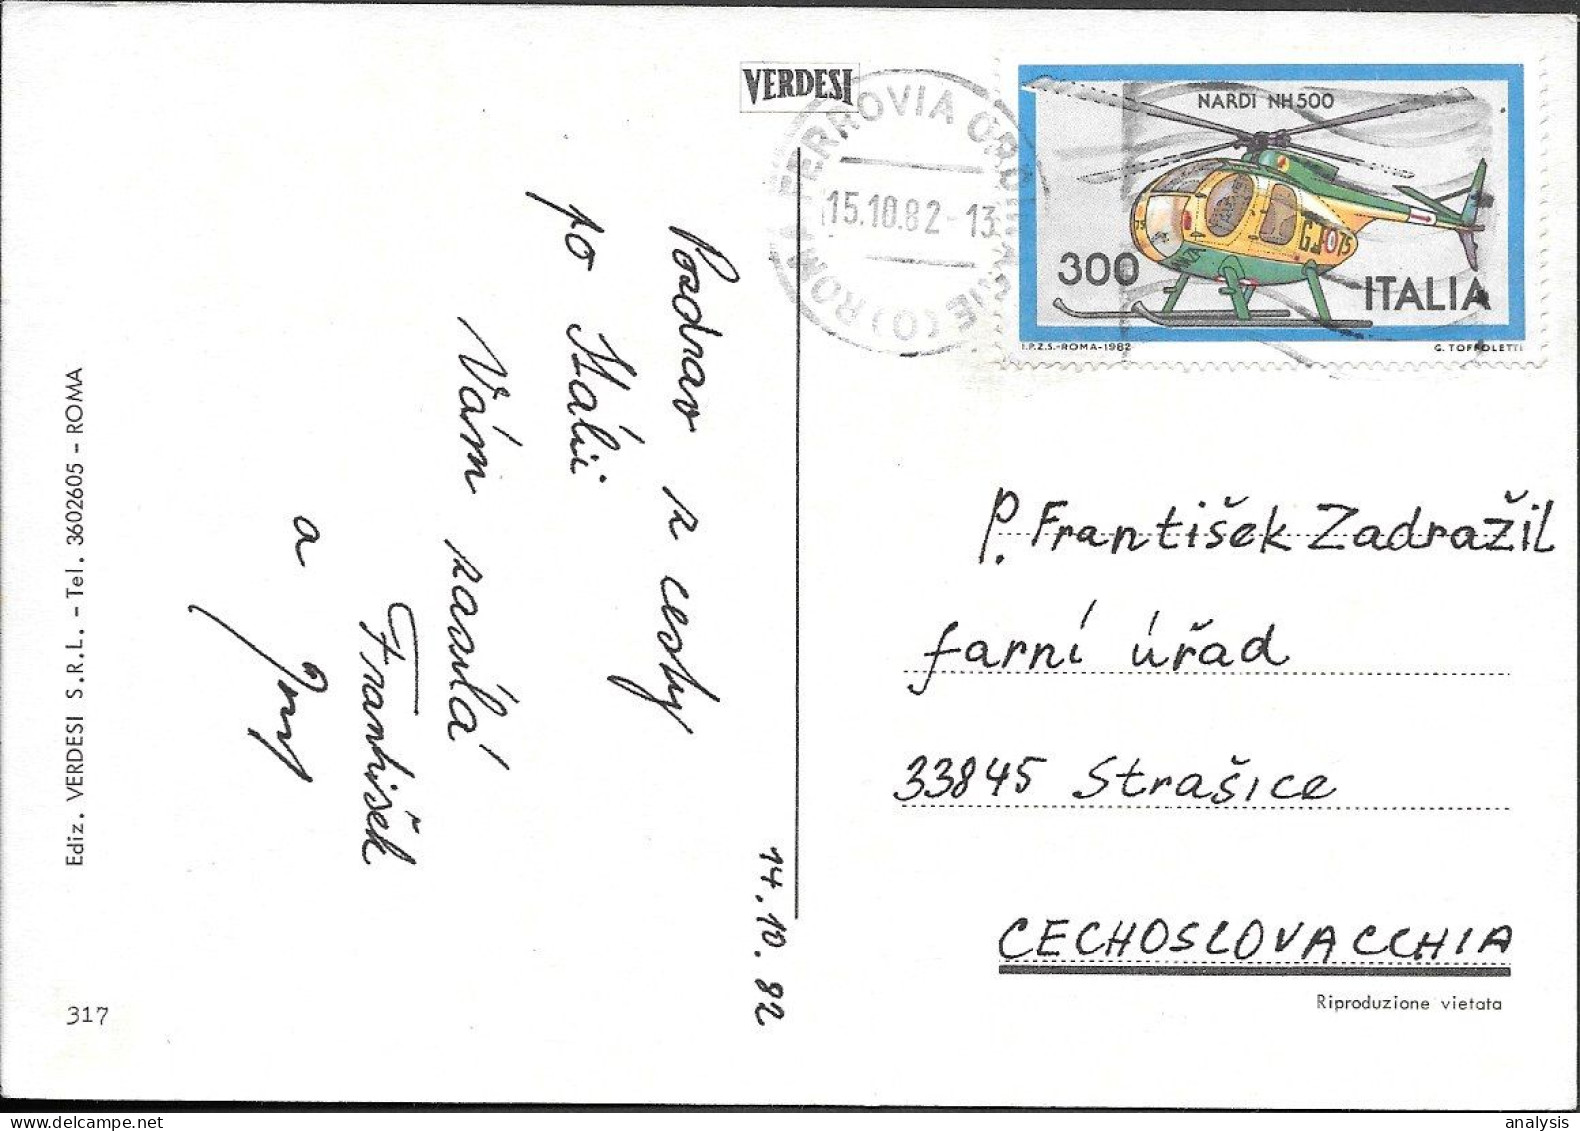 Italy Rome Postcard Mailed 1982 W/ Helicopter Stamp Nardi NH500 - 1981-90: Marcophilie